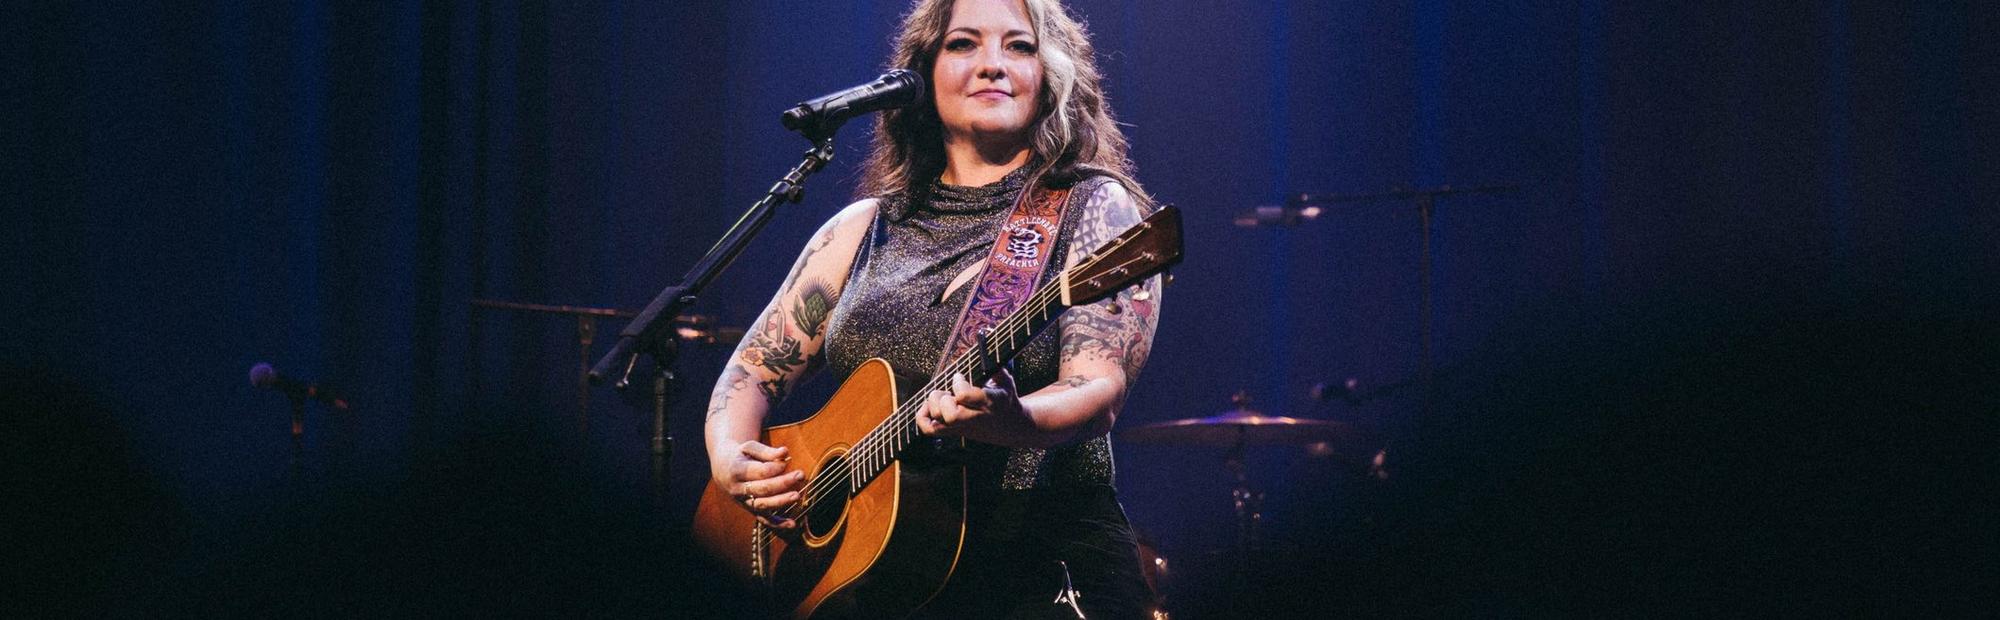 Ashley McBryde: A Country Music Icon in the Making